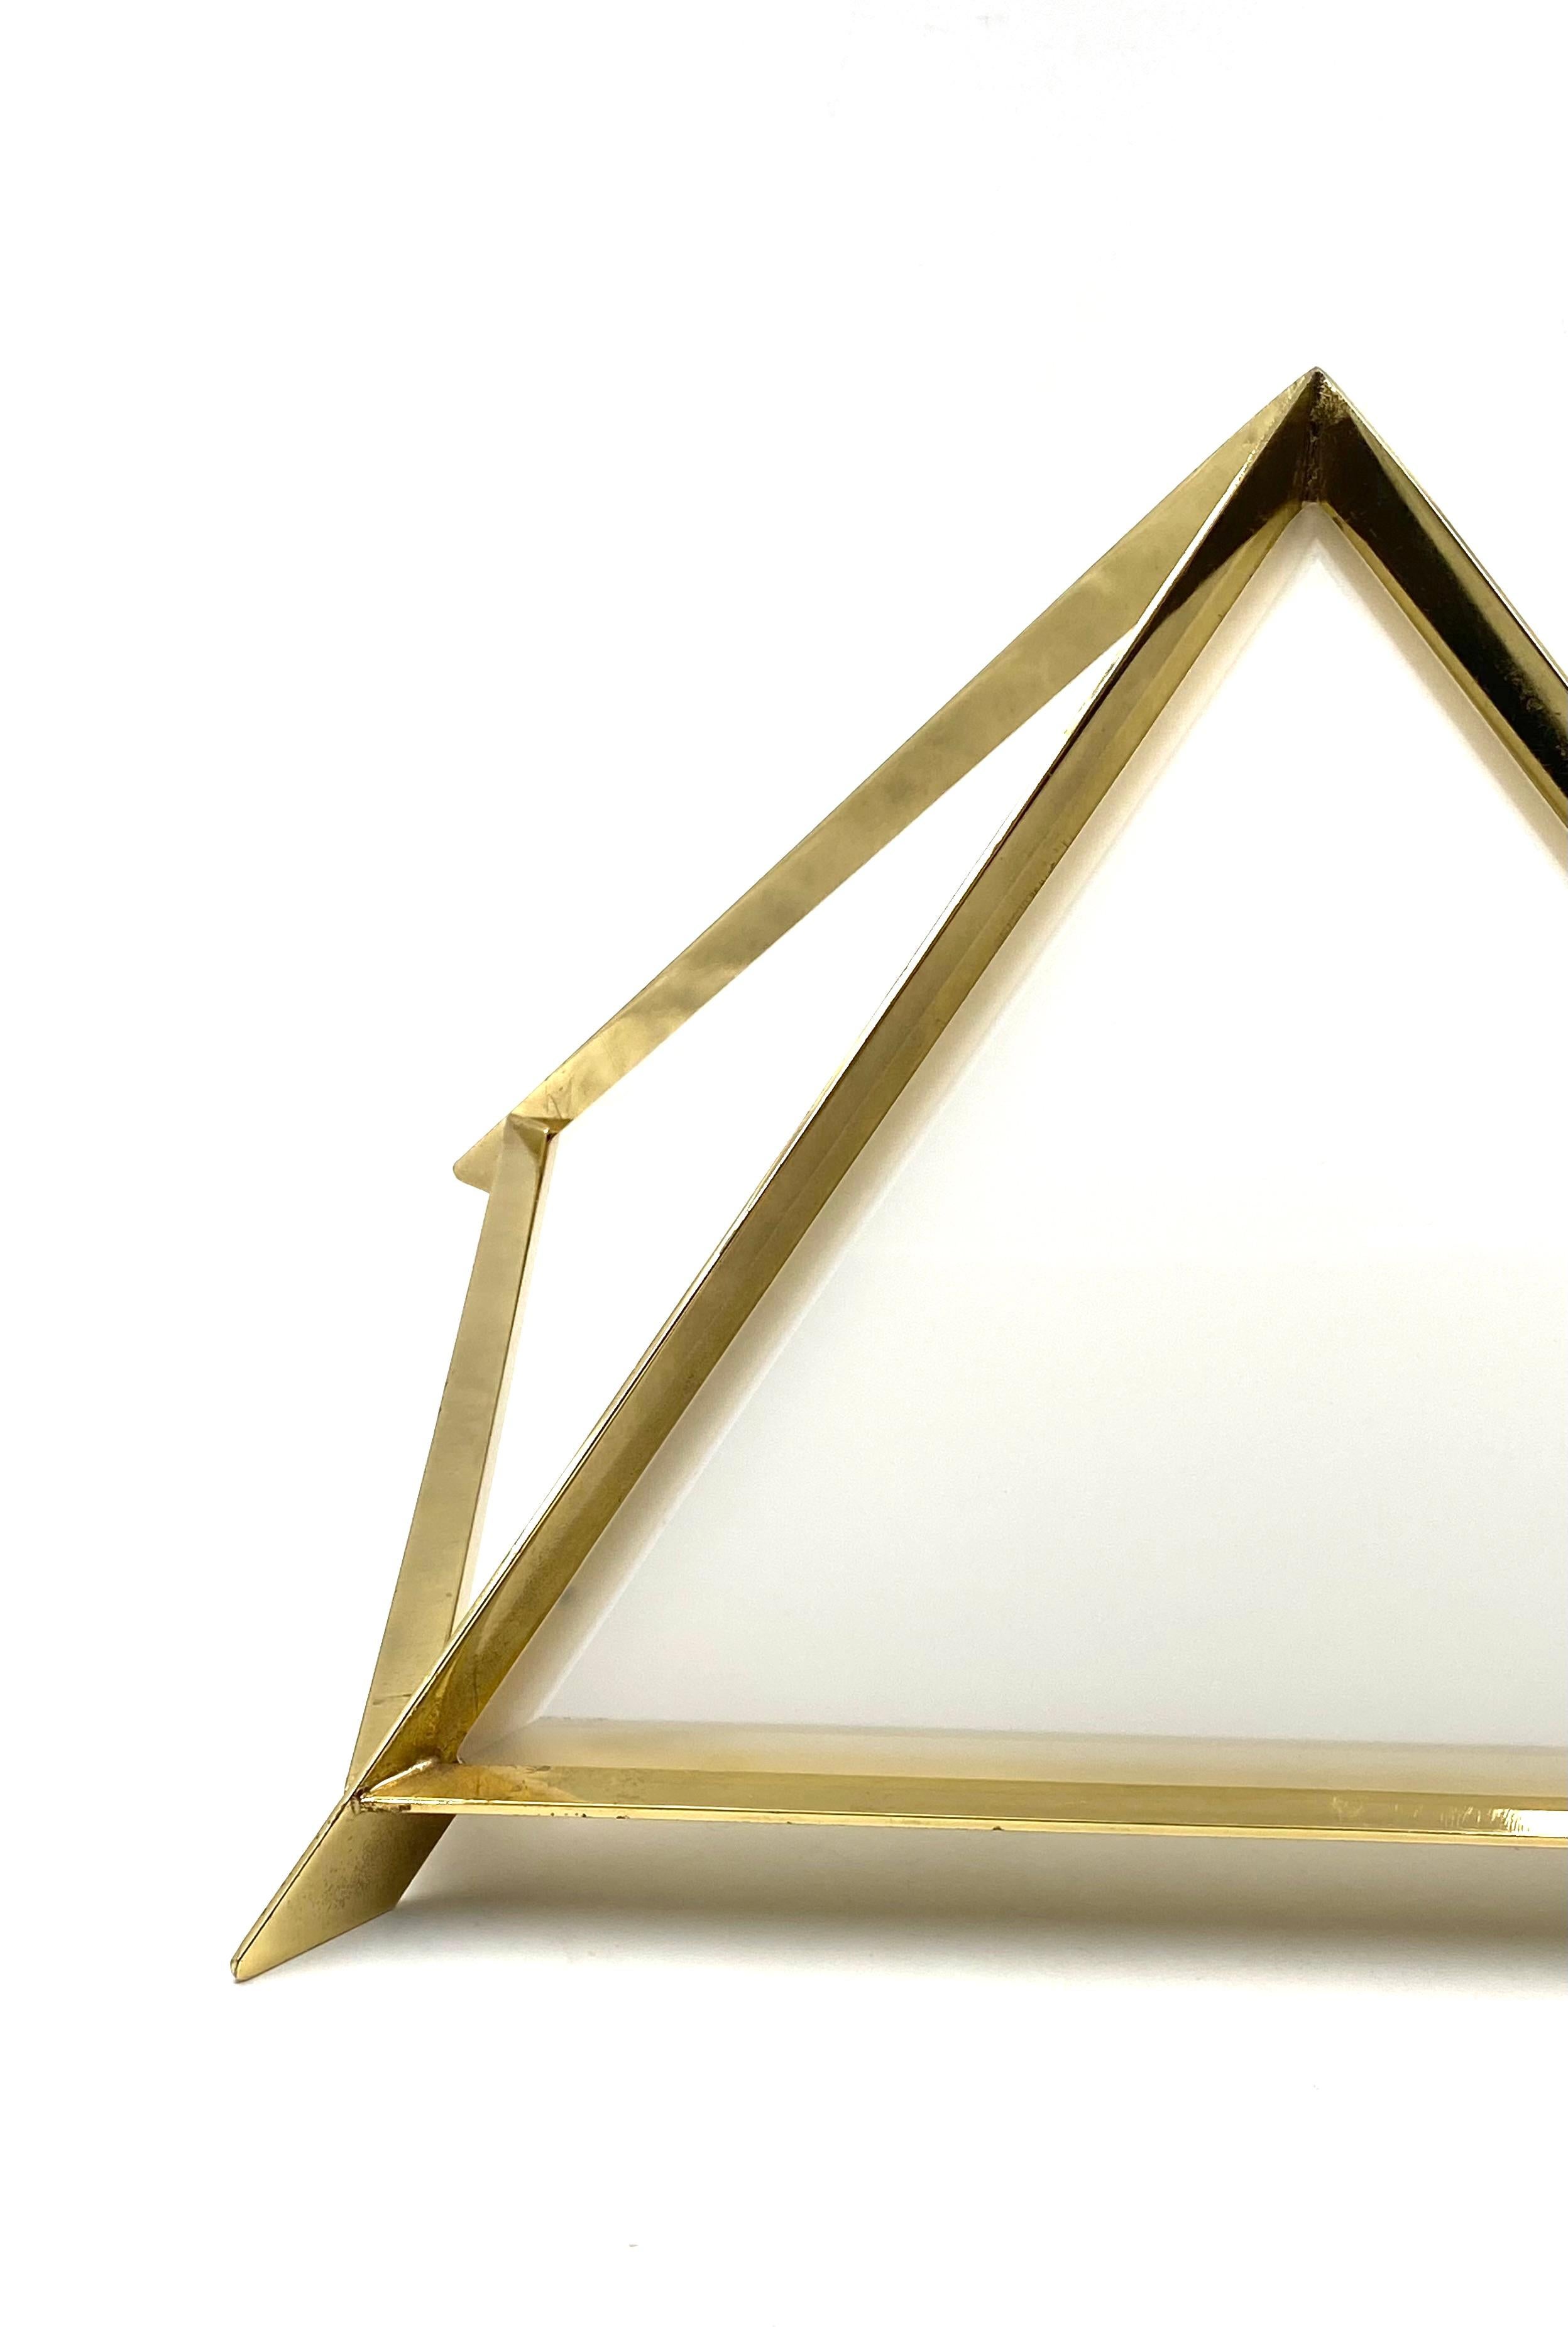 Golden Brass Pyramidal Table Lamp, Christos, Italy, 1970 For Sale 10